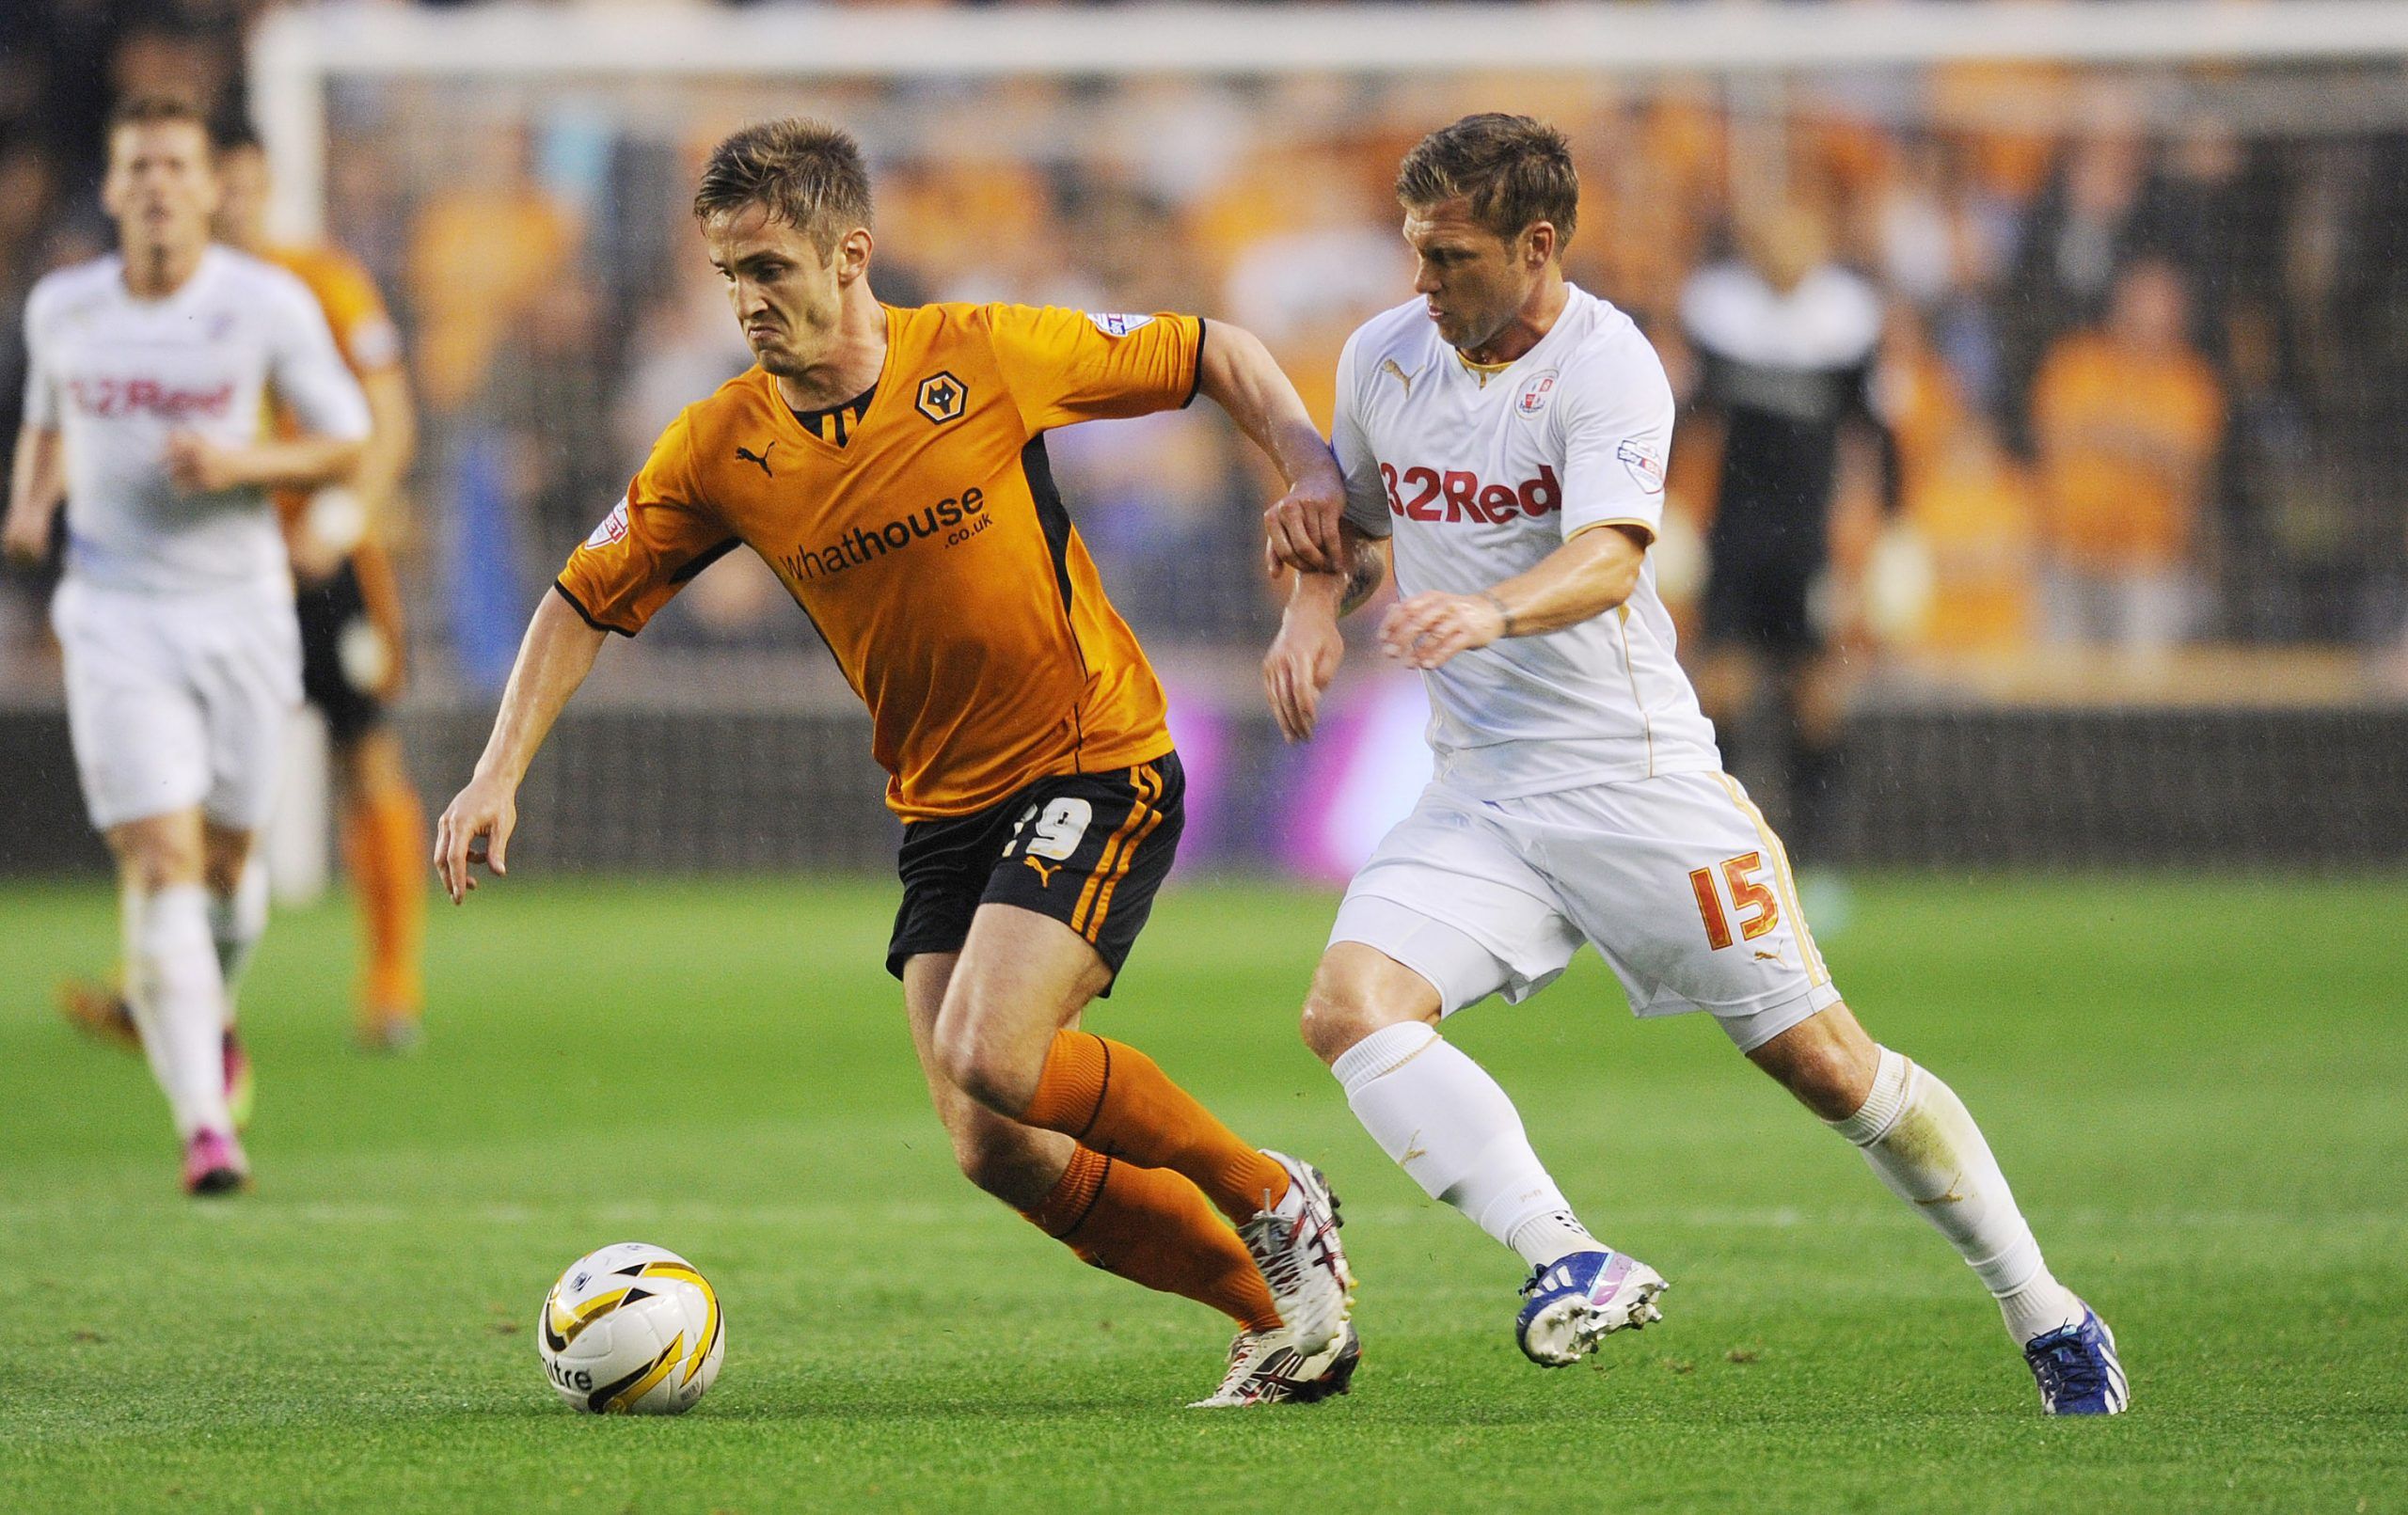 Football - Wolverhampton Wanderers v Crawley Town - Sky Bet Football League One - Molineux - 23/8/13 
Kevin Doyle of Wolves and Crawley's Dannie Bulman (R) in action 
Mandatory Credit: Action Images / Alex Morton 
Livepic 
EDITORIAL USE ONLY. No use with unauthorized audio, video, data, fixture lists, club/league logos or live services. Online in-match use limited to 45 images, no video emulation. No use in betting, games or single club/league/player publications.  Please contact your account re